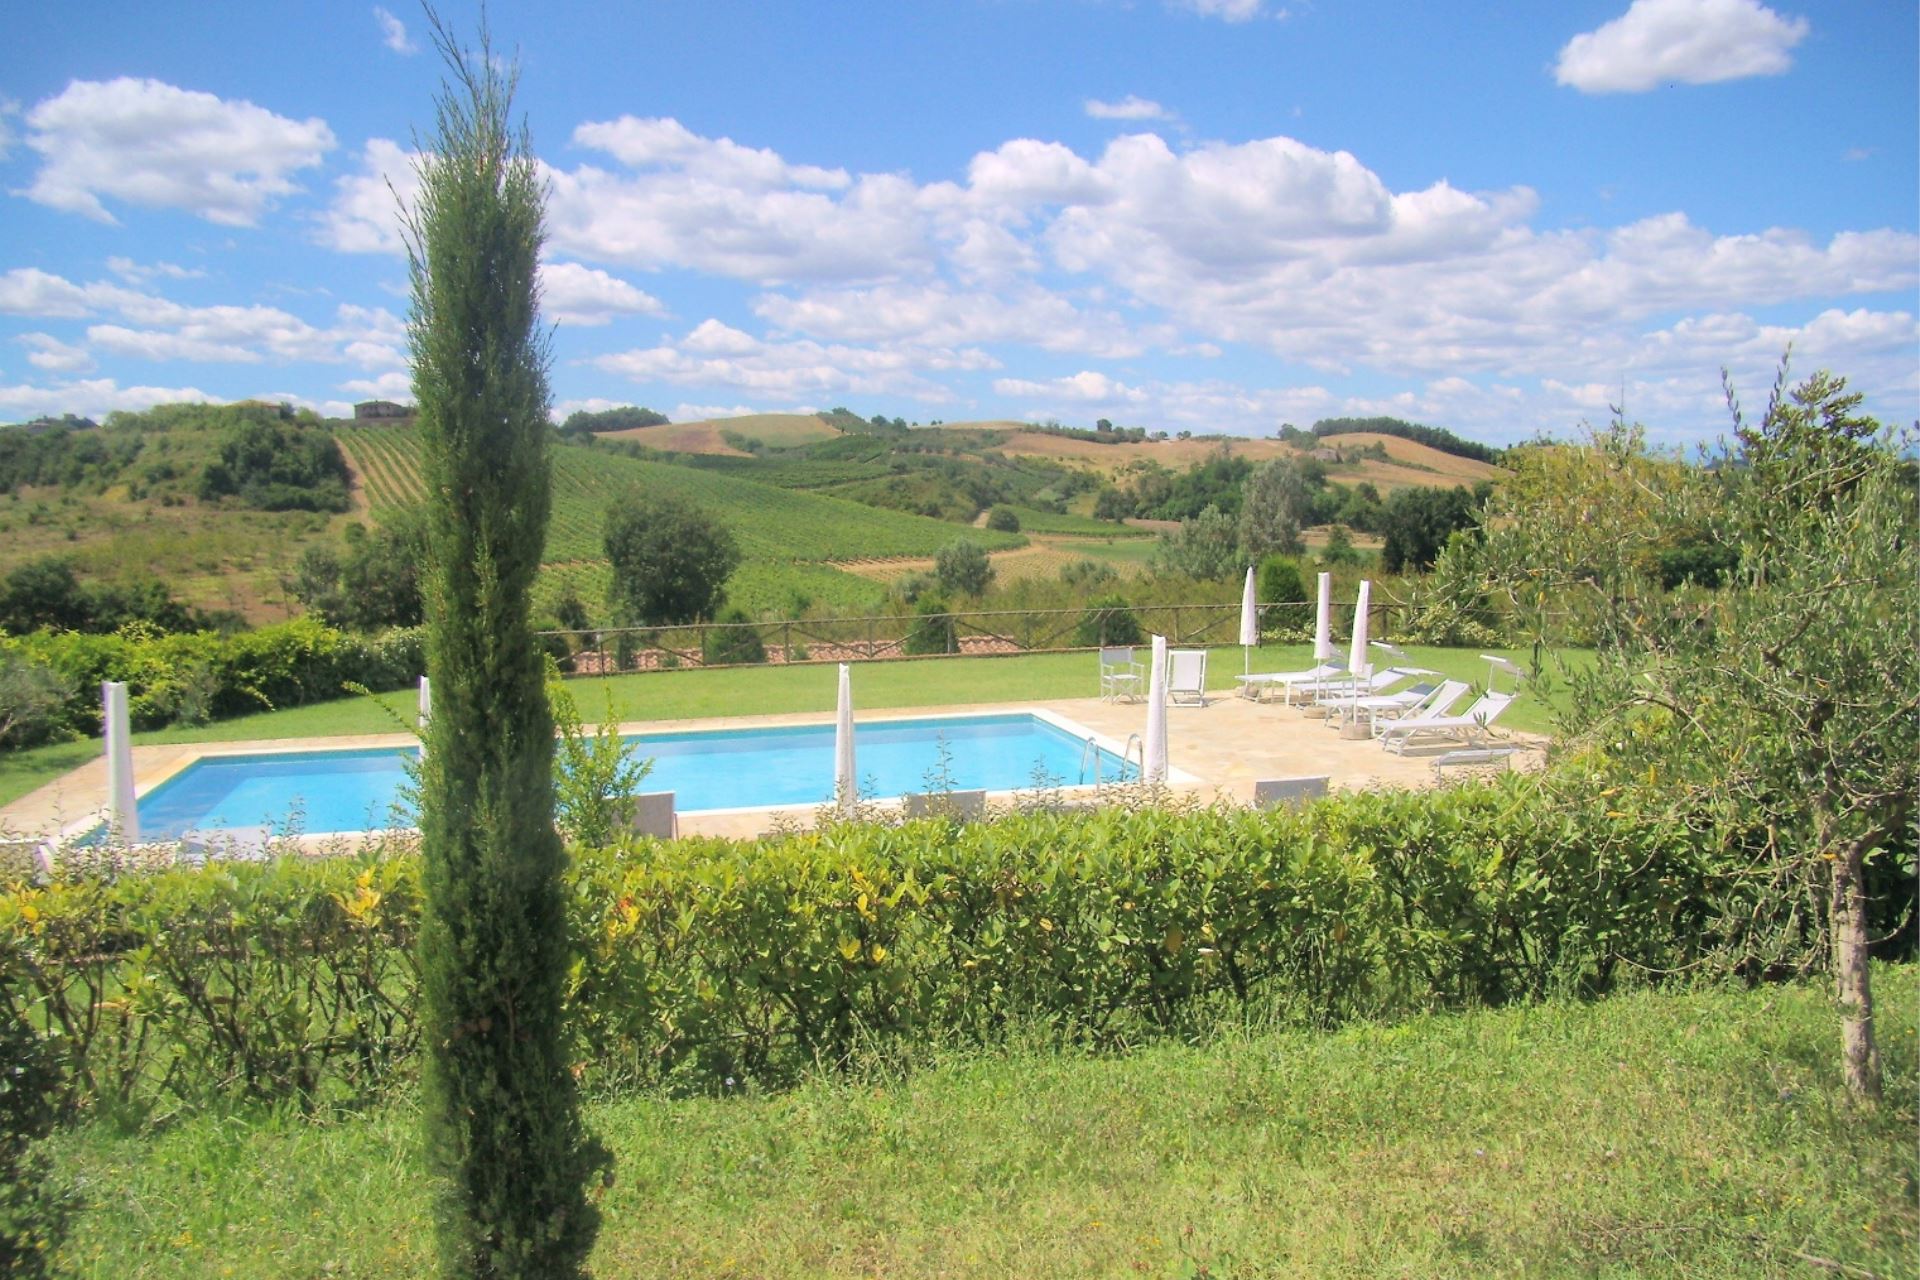 APARTMENTS WITH POOL FILOSTRATO GAMBASSI TERME TOSCANA